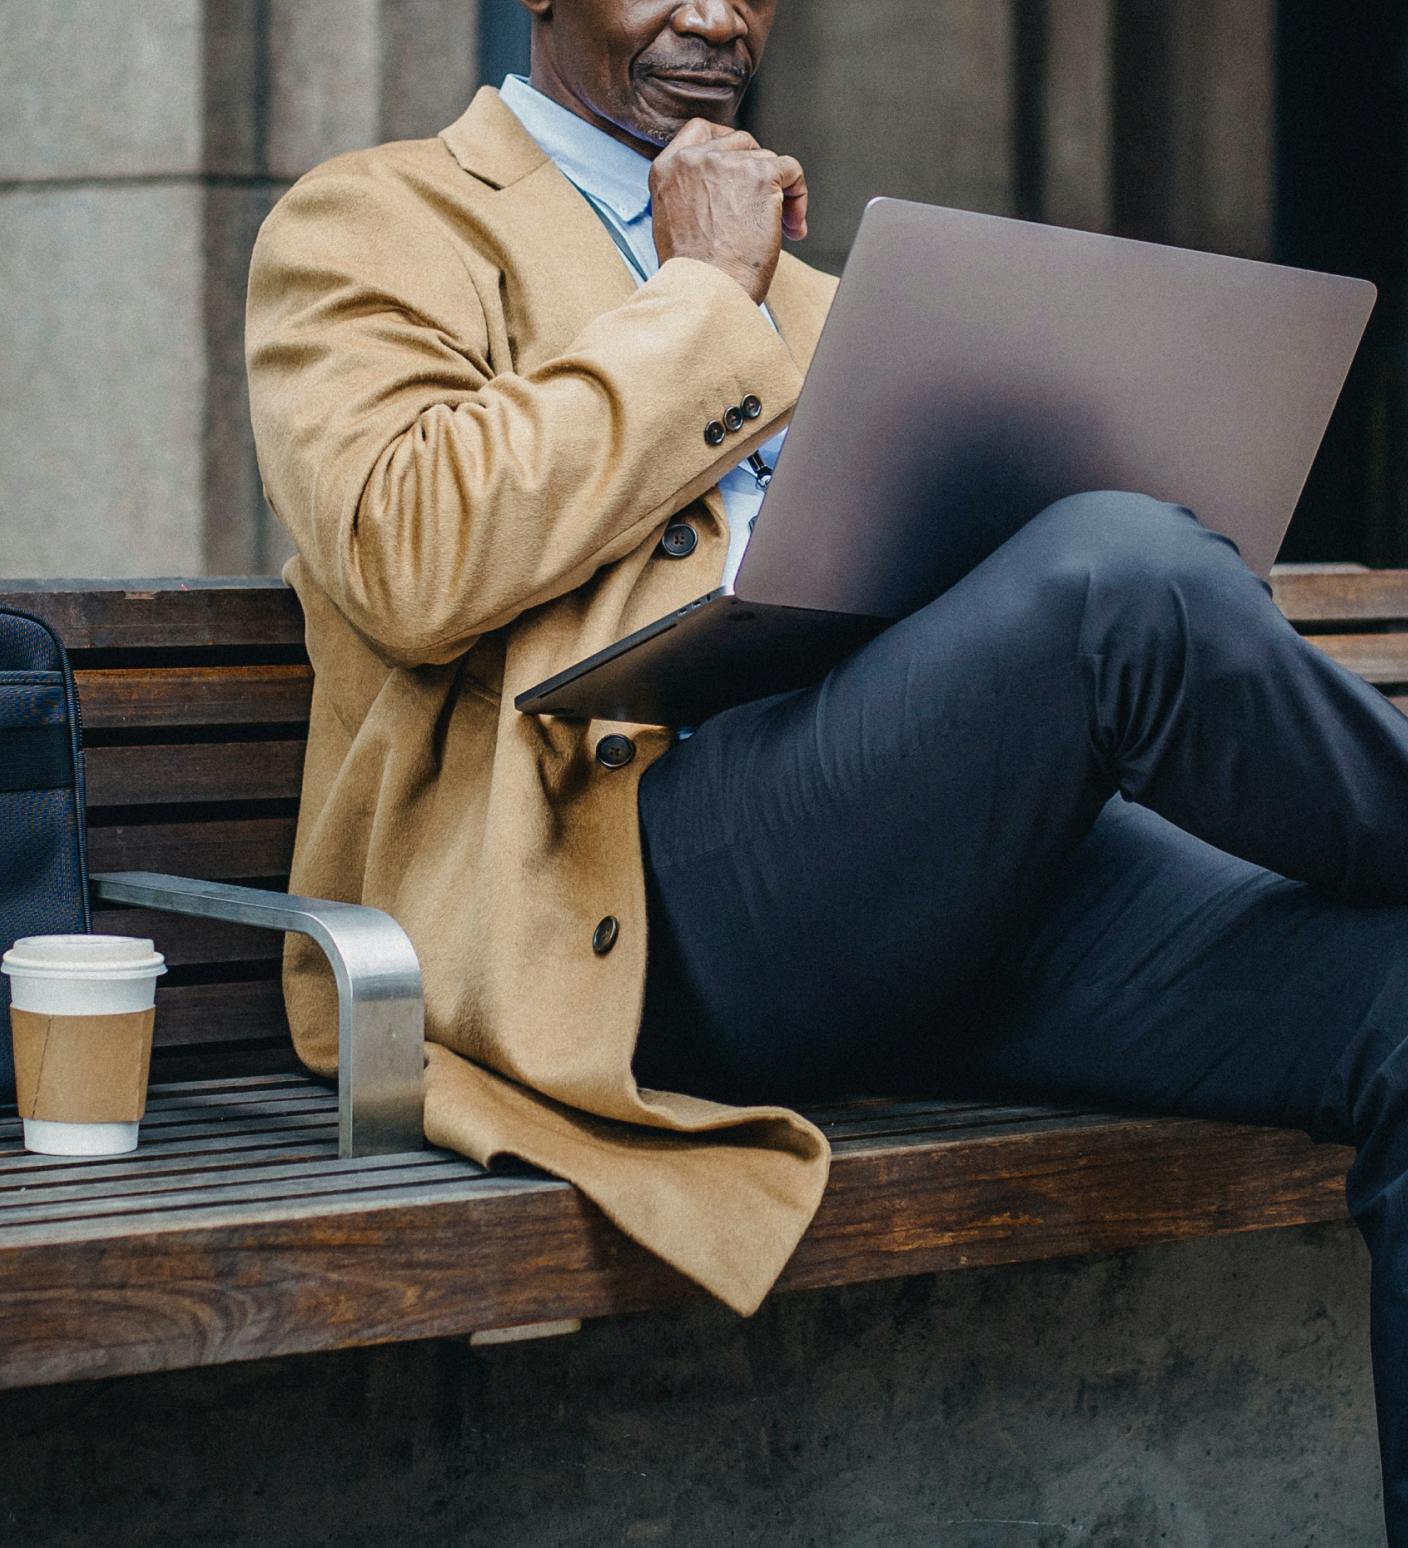 Man sitting at a bench on computer